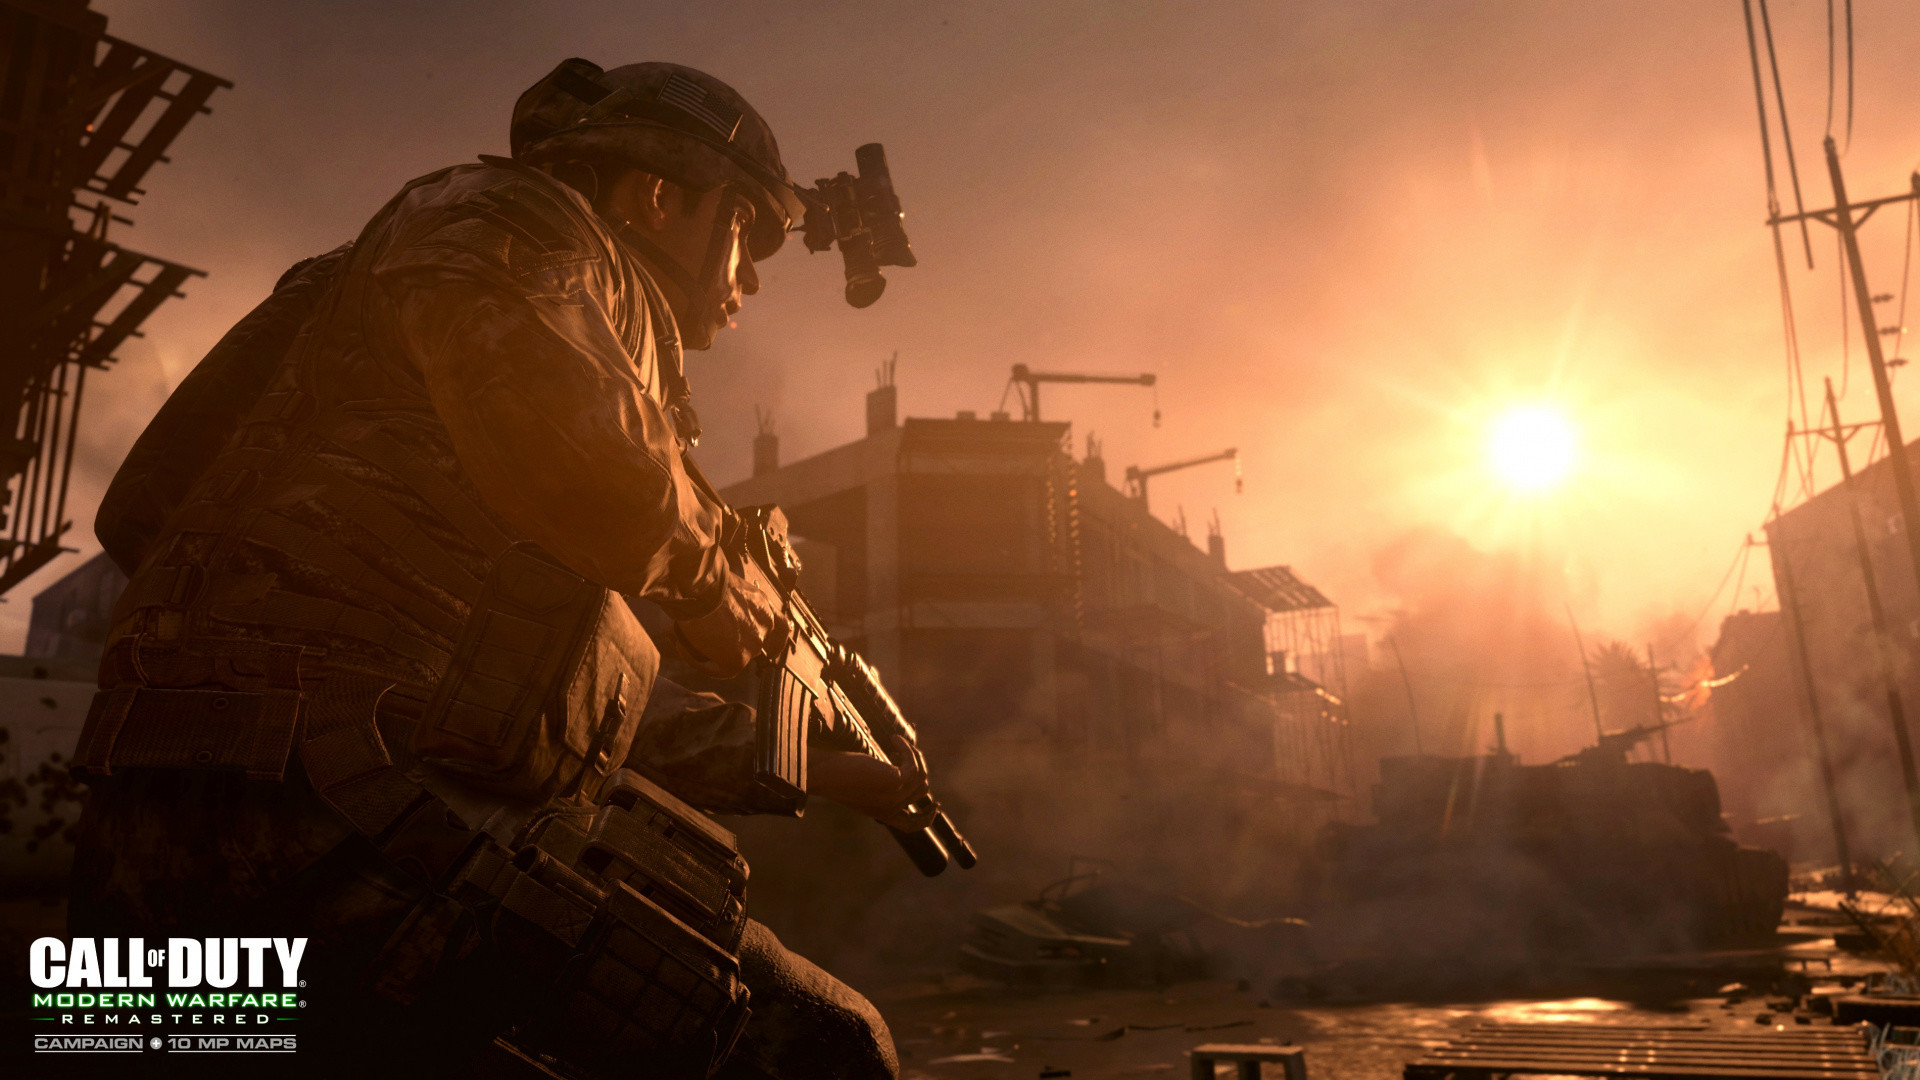 1920x1080 Activision, pc Game, Infinity Ward, Soldier, Call of Duty Modern Warfare 2  Full HD, HDTV, 1080p 16:9 Wallpaper in 